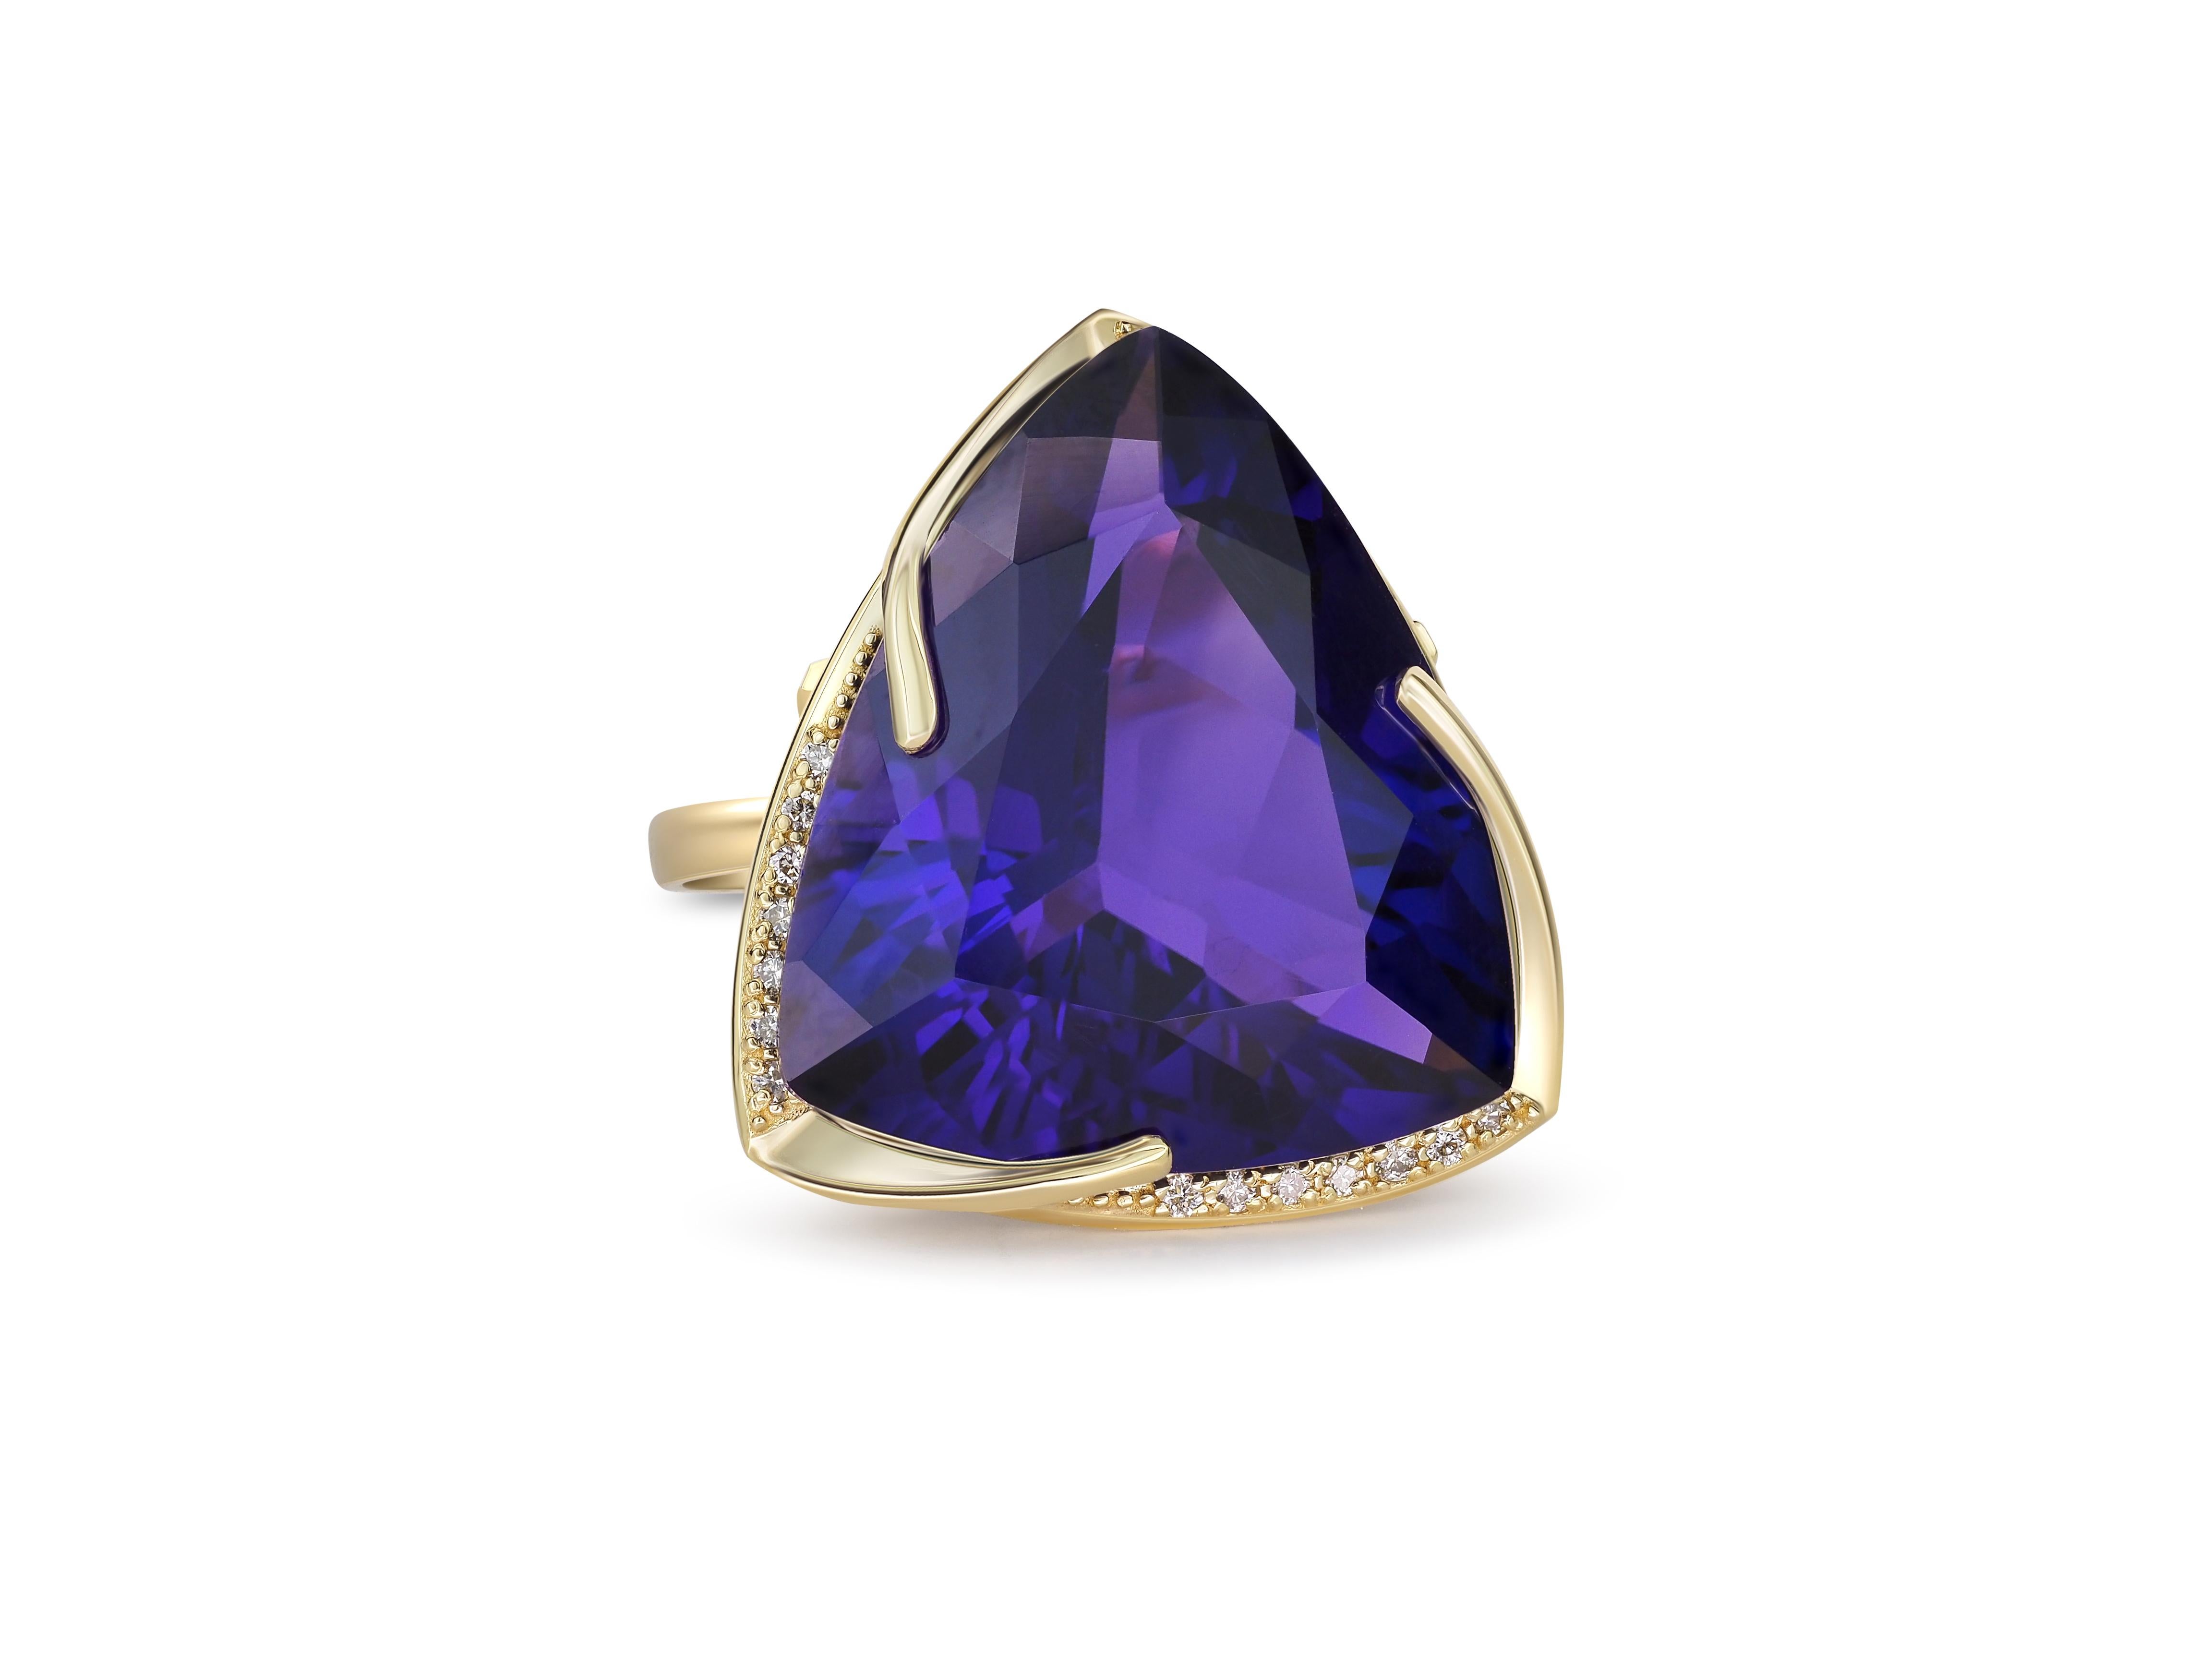 Trillion Cut 14 Karat Gold Ring with Amethyst and Diamonds, Amethyst Cocktail Ring